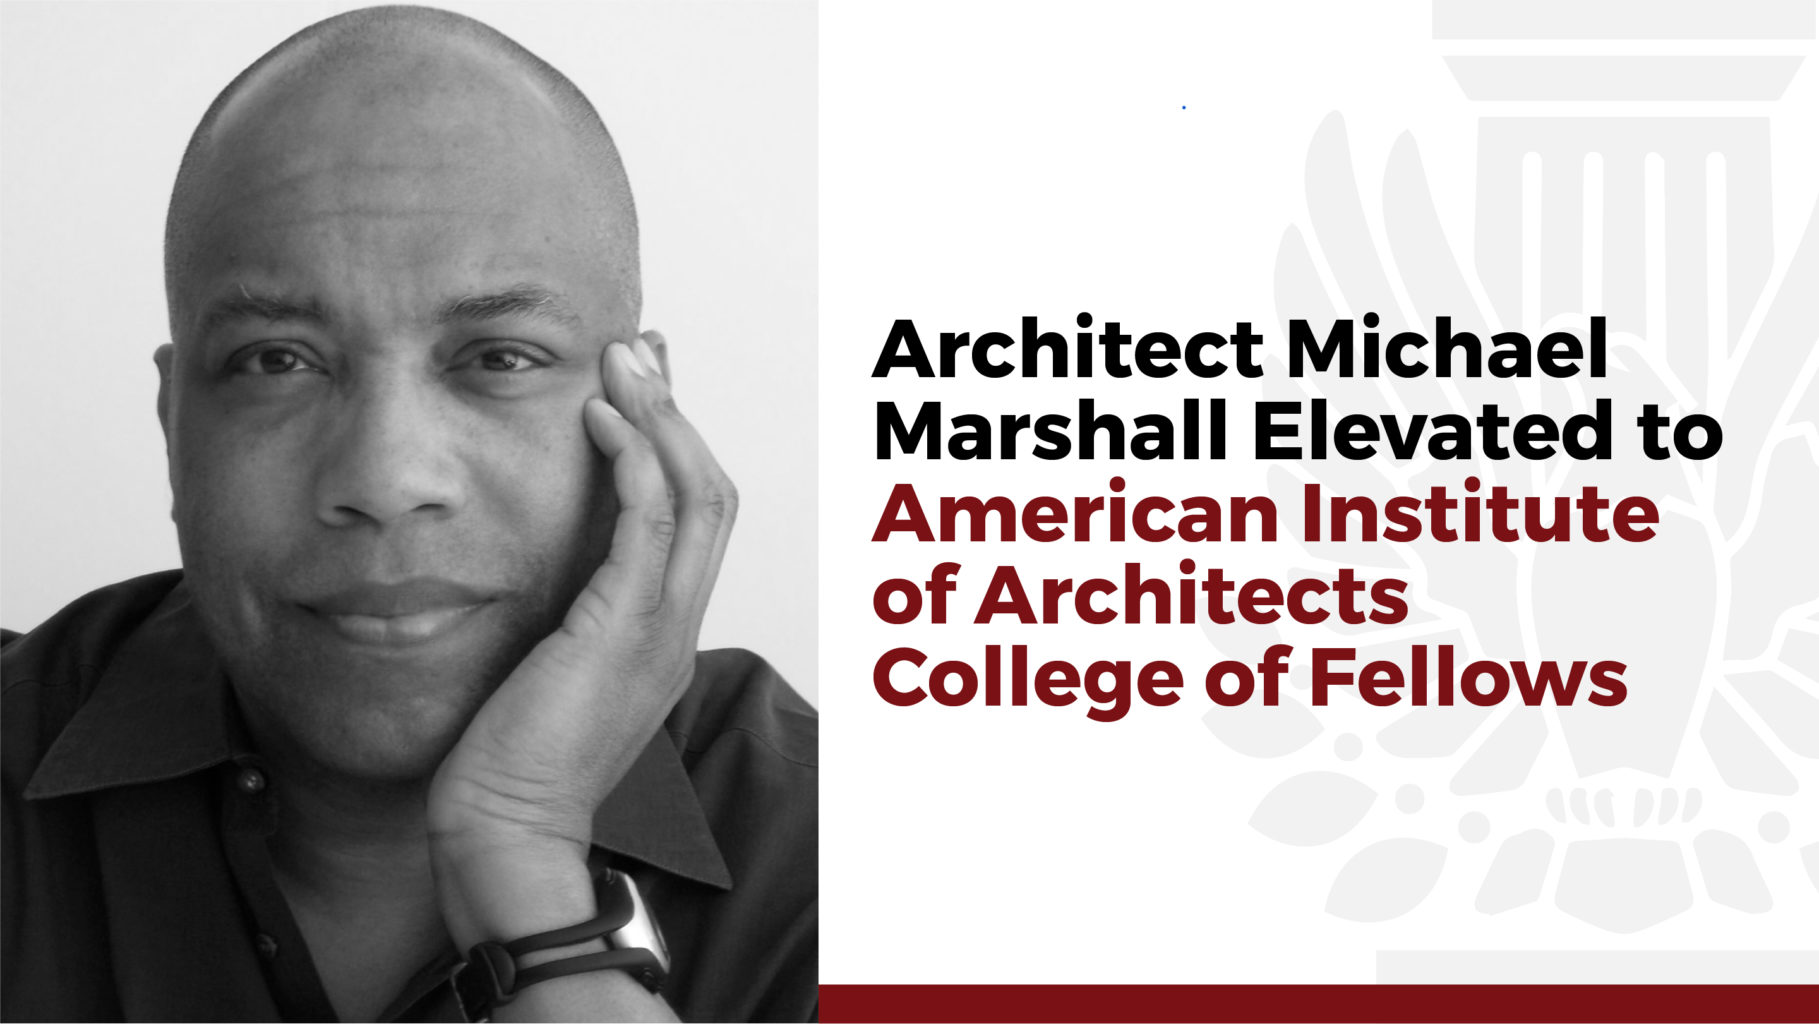 Architect Michael Marshall Elevated to American Institute of Architects College of Fellows